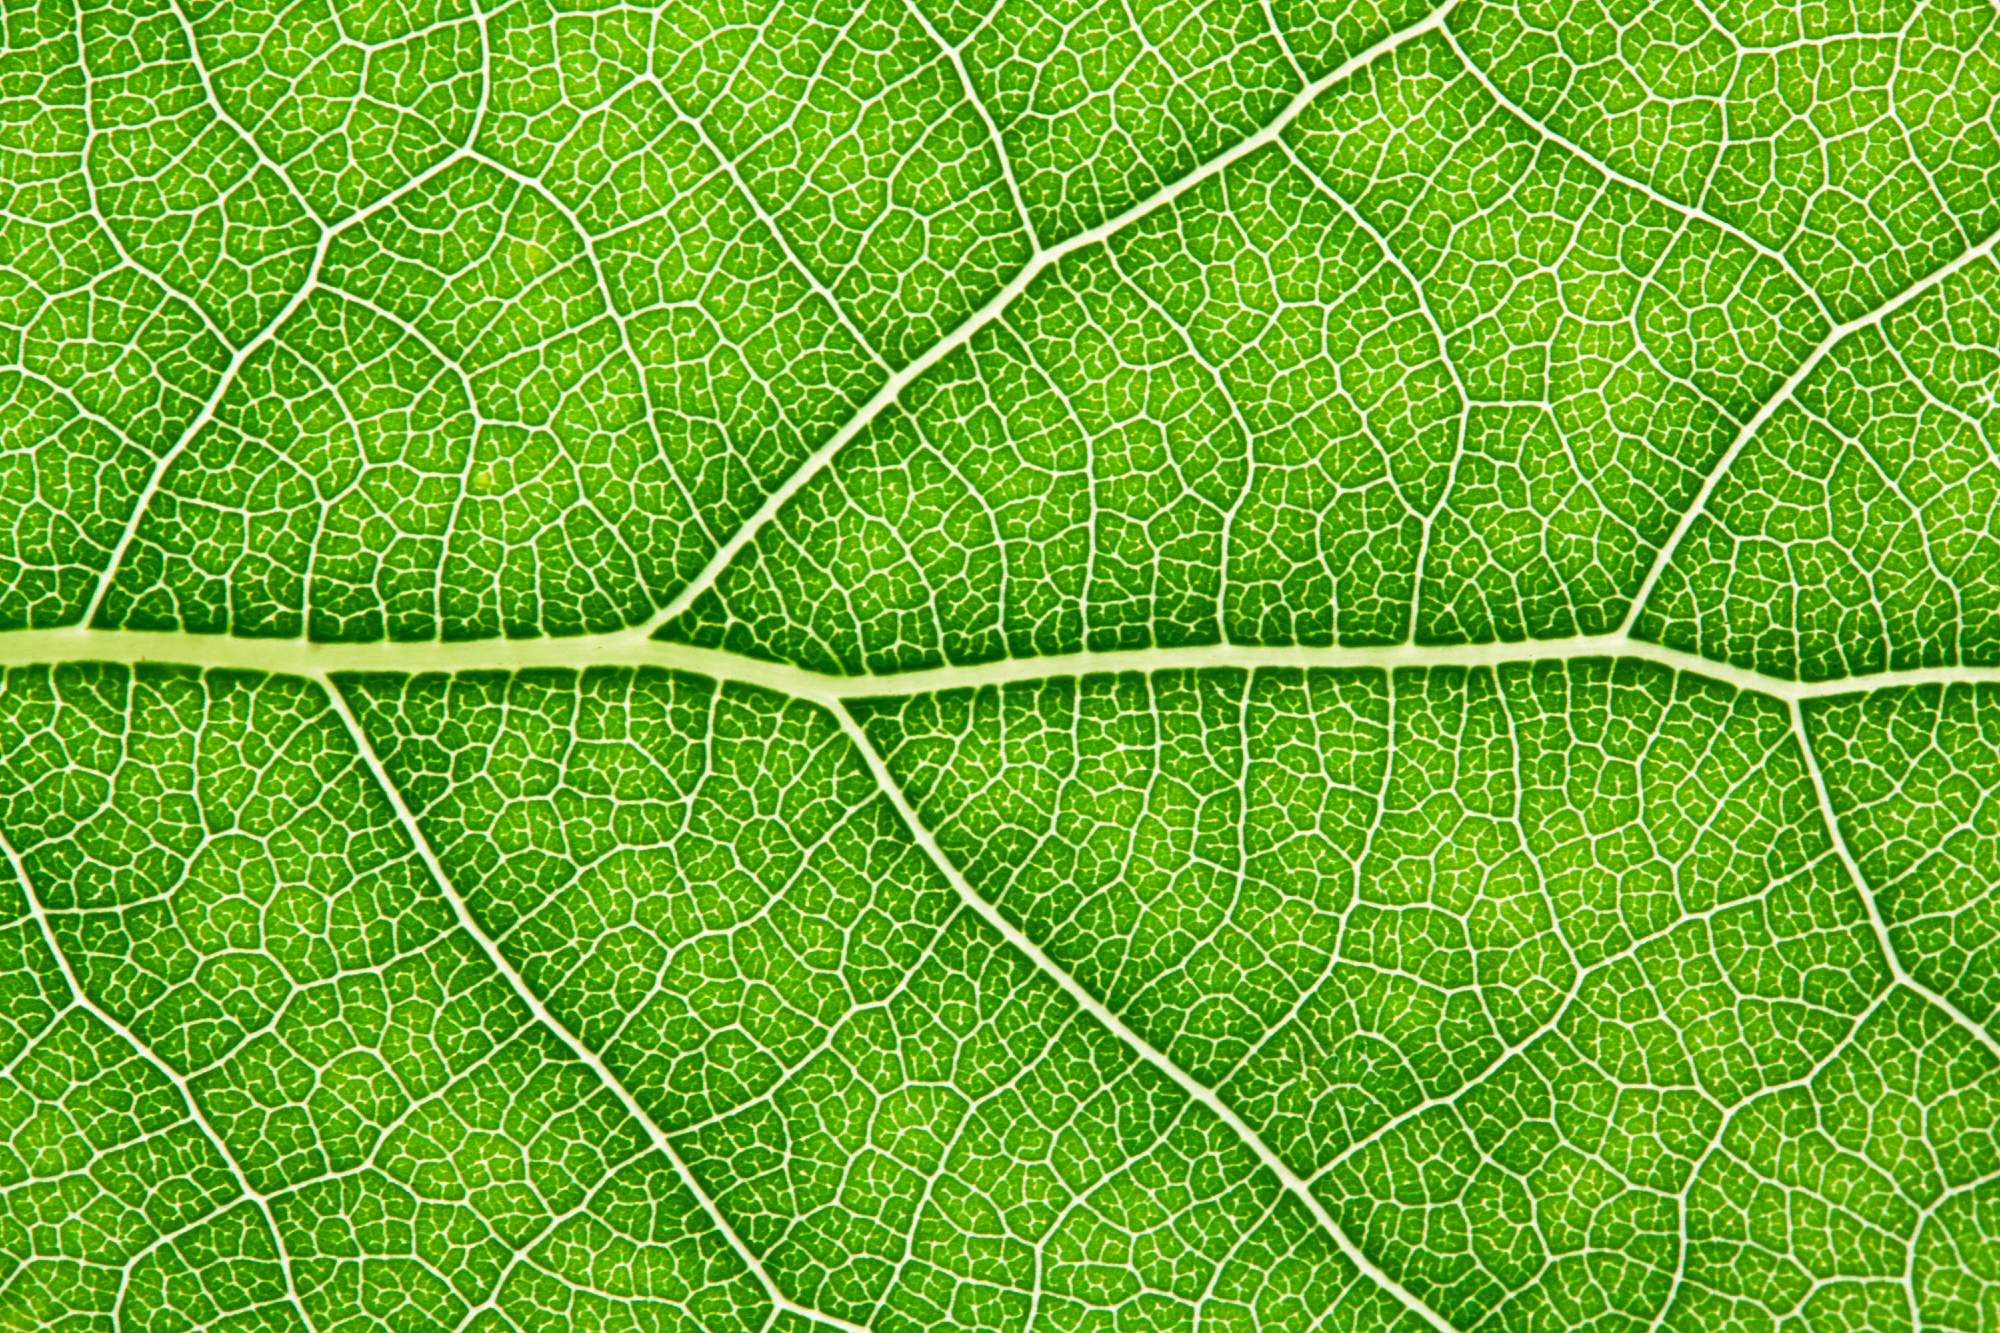 a close up image of a leaf with the main vessels and branches visible